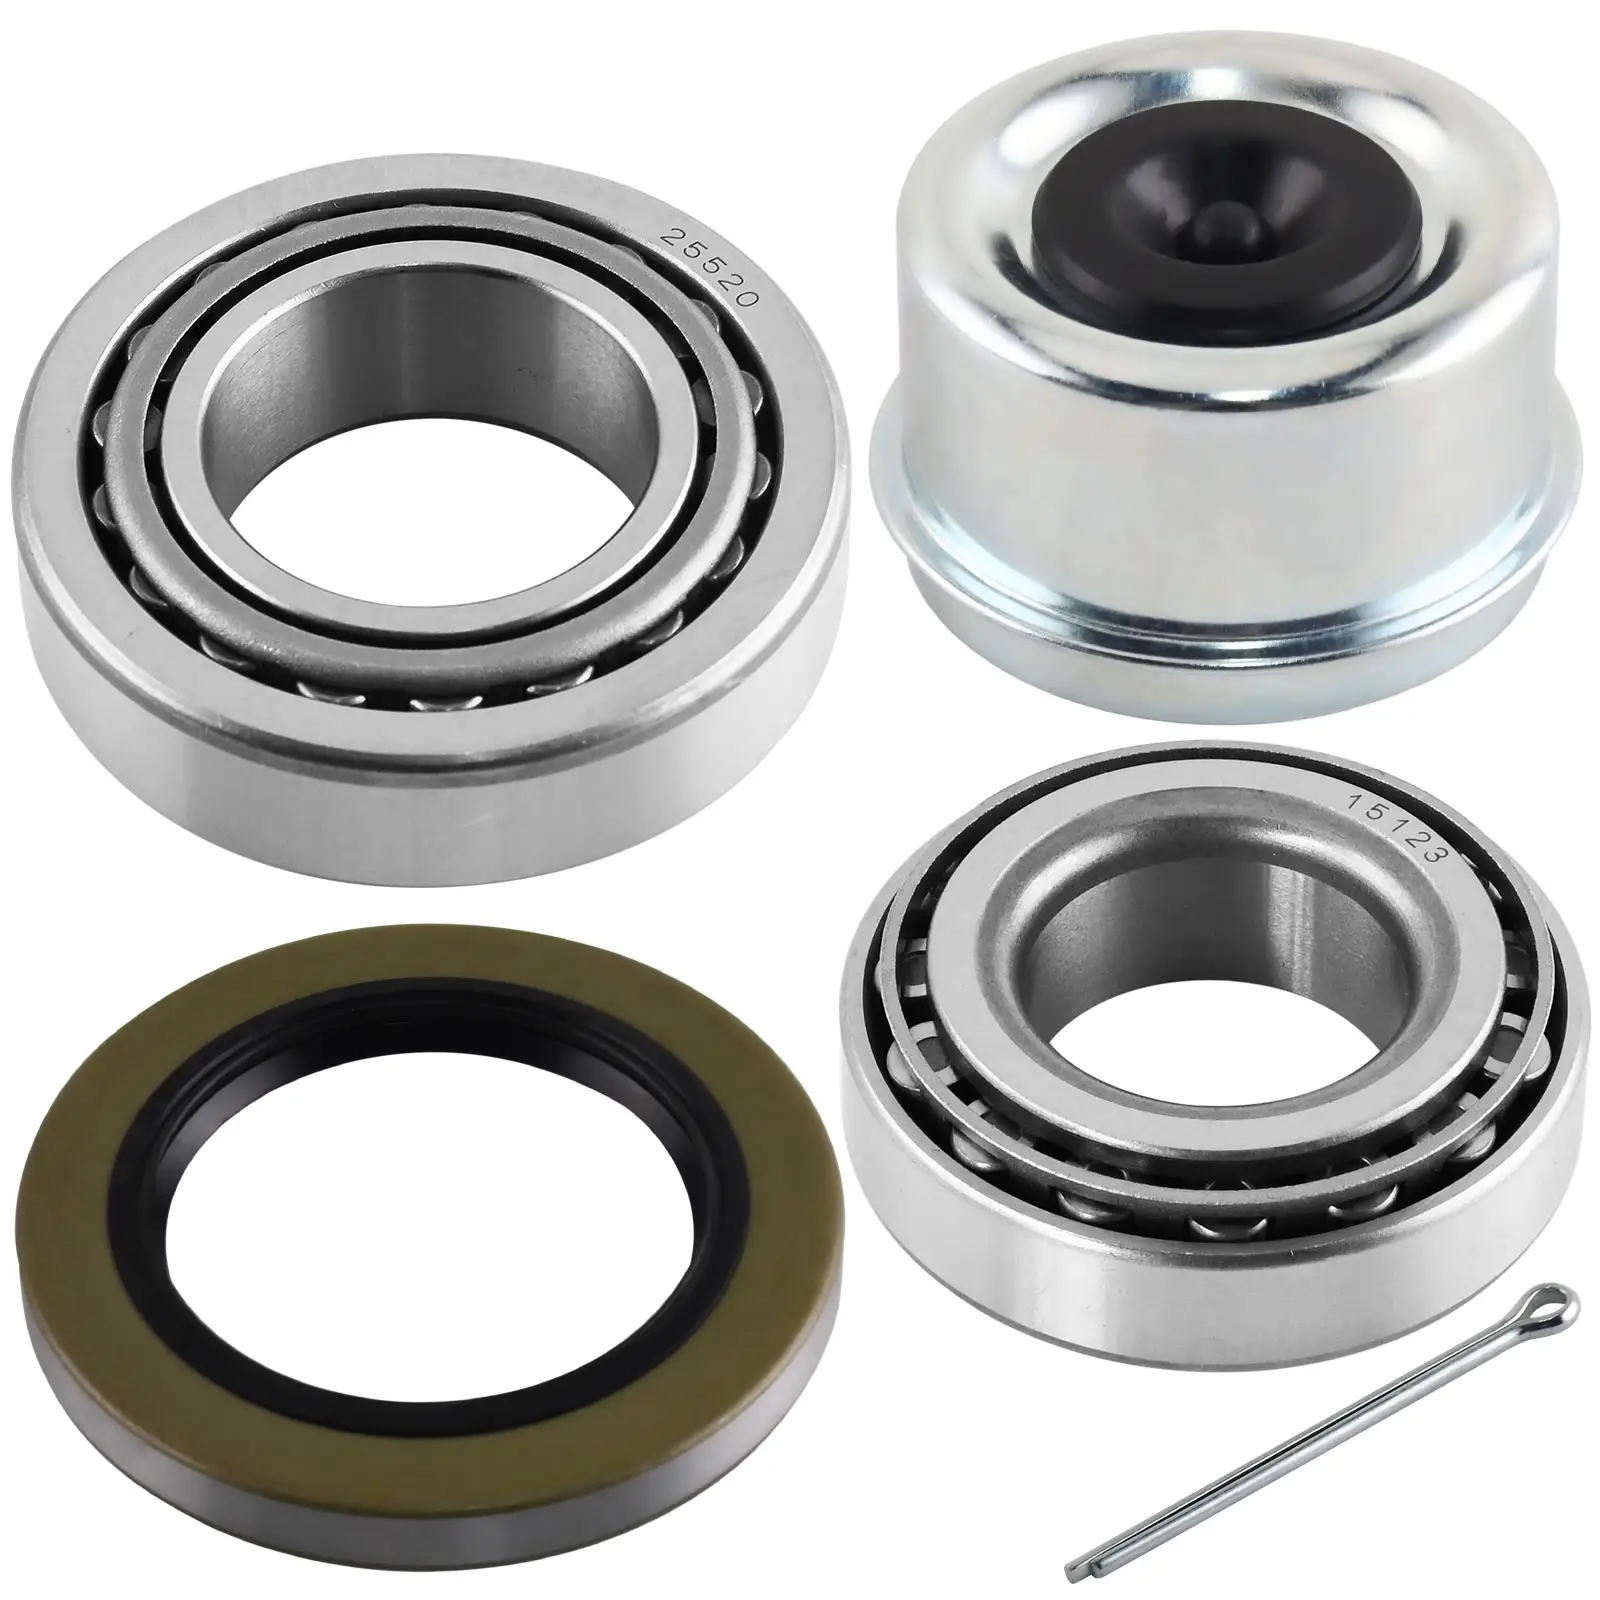 Wholesale Trailer Bearing Kit for 6000 LBS Axle High Quality Durable OEM Auto Trailer Parts 15123 22580 Bearing